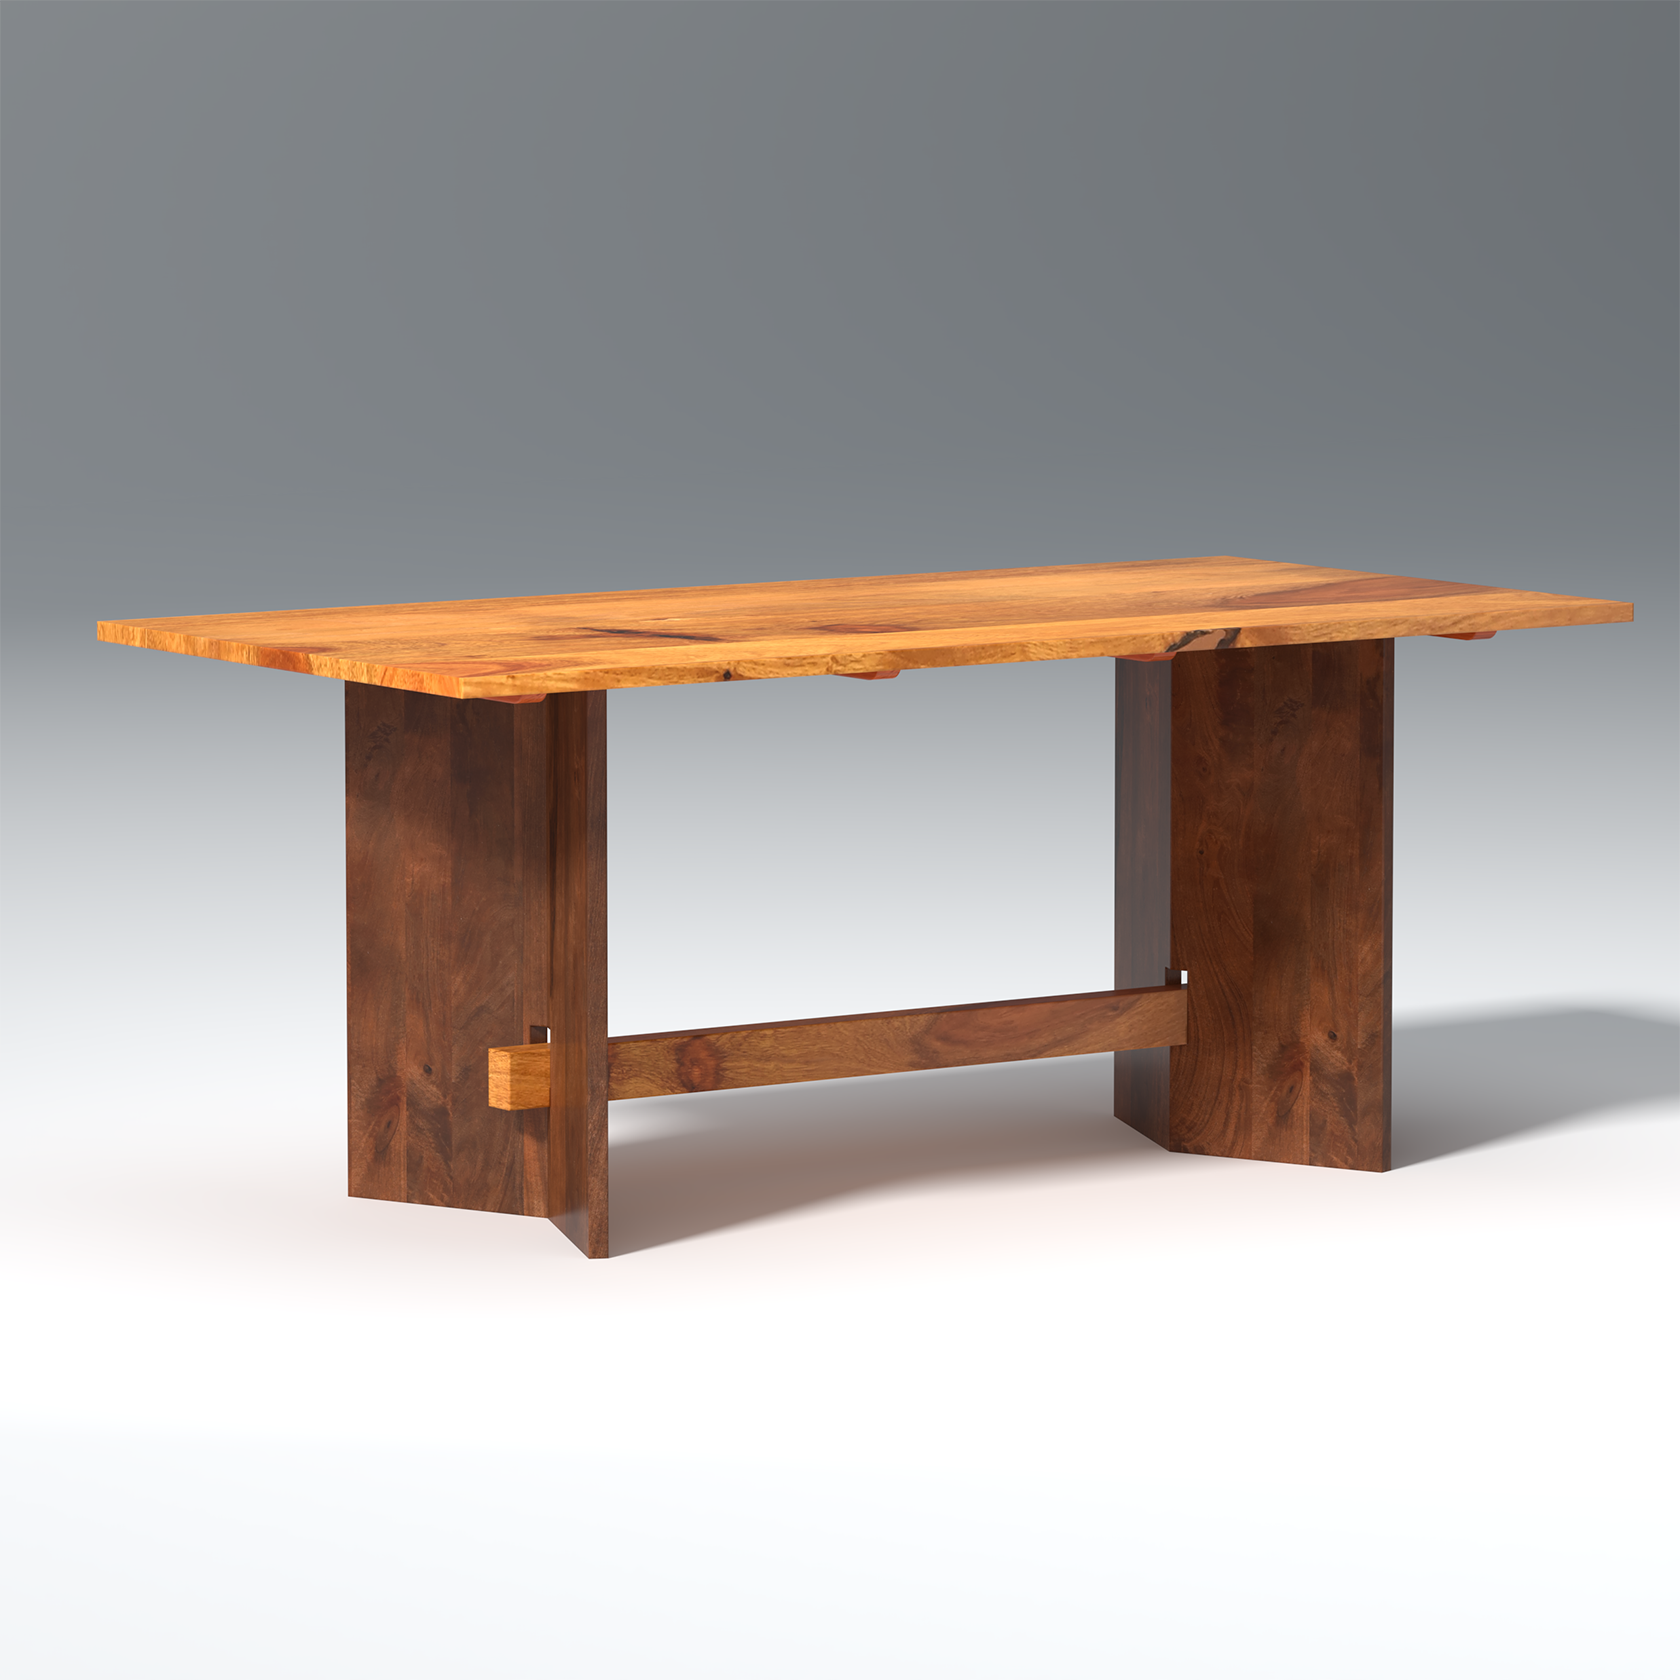 Pepin dining table